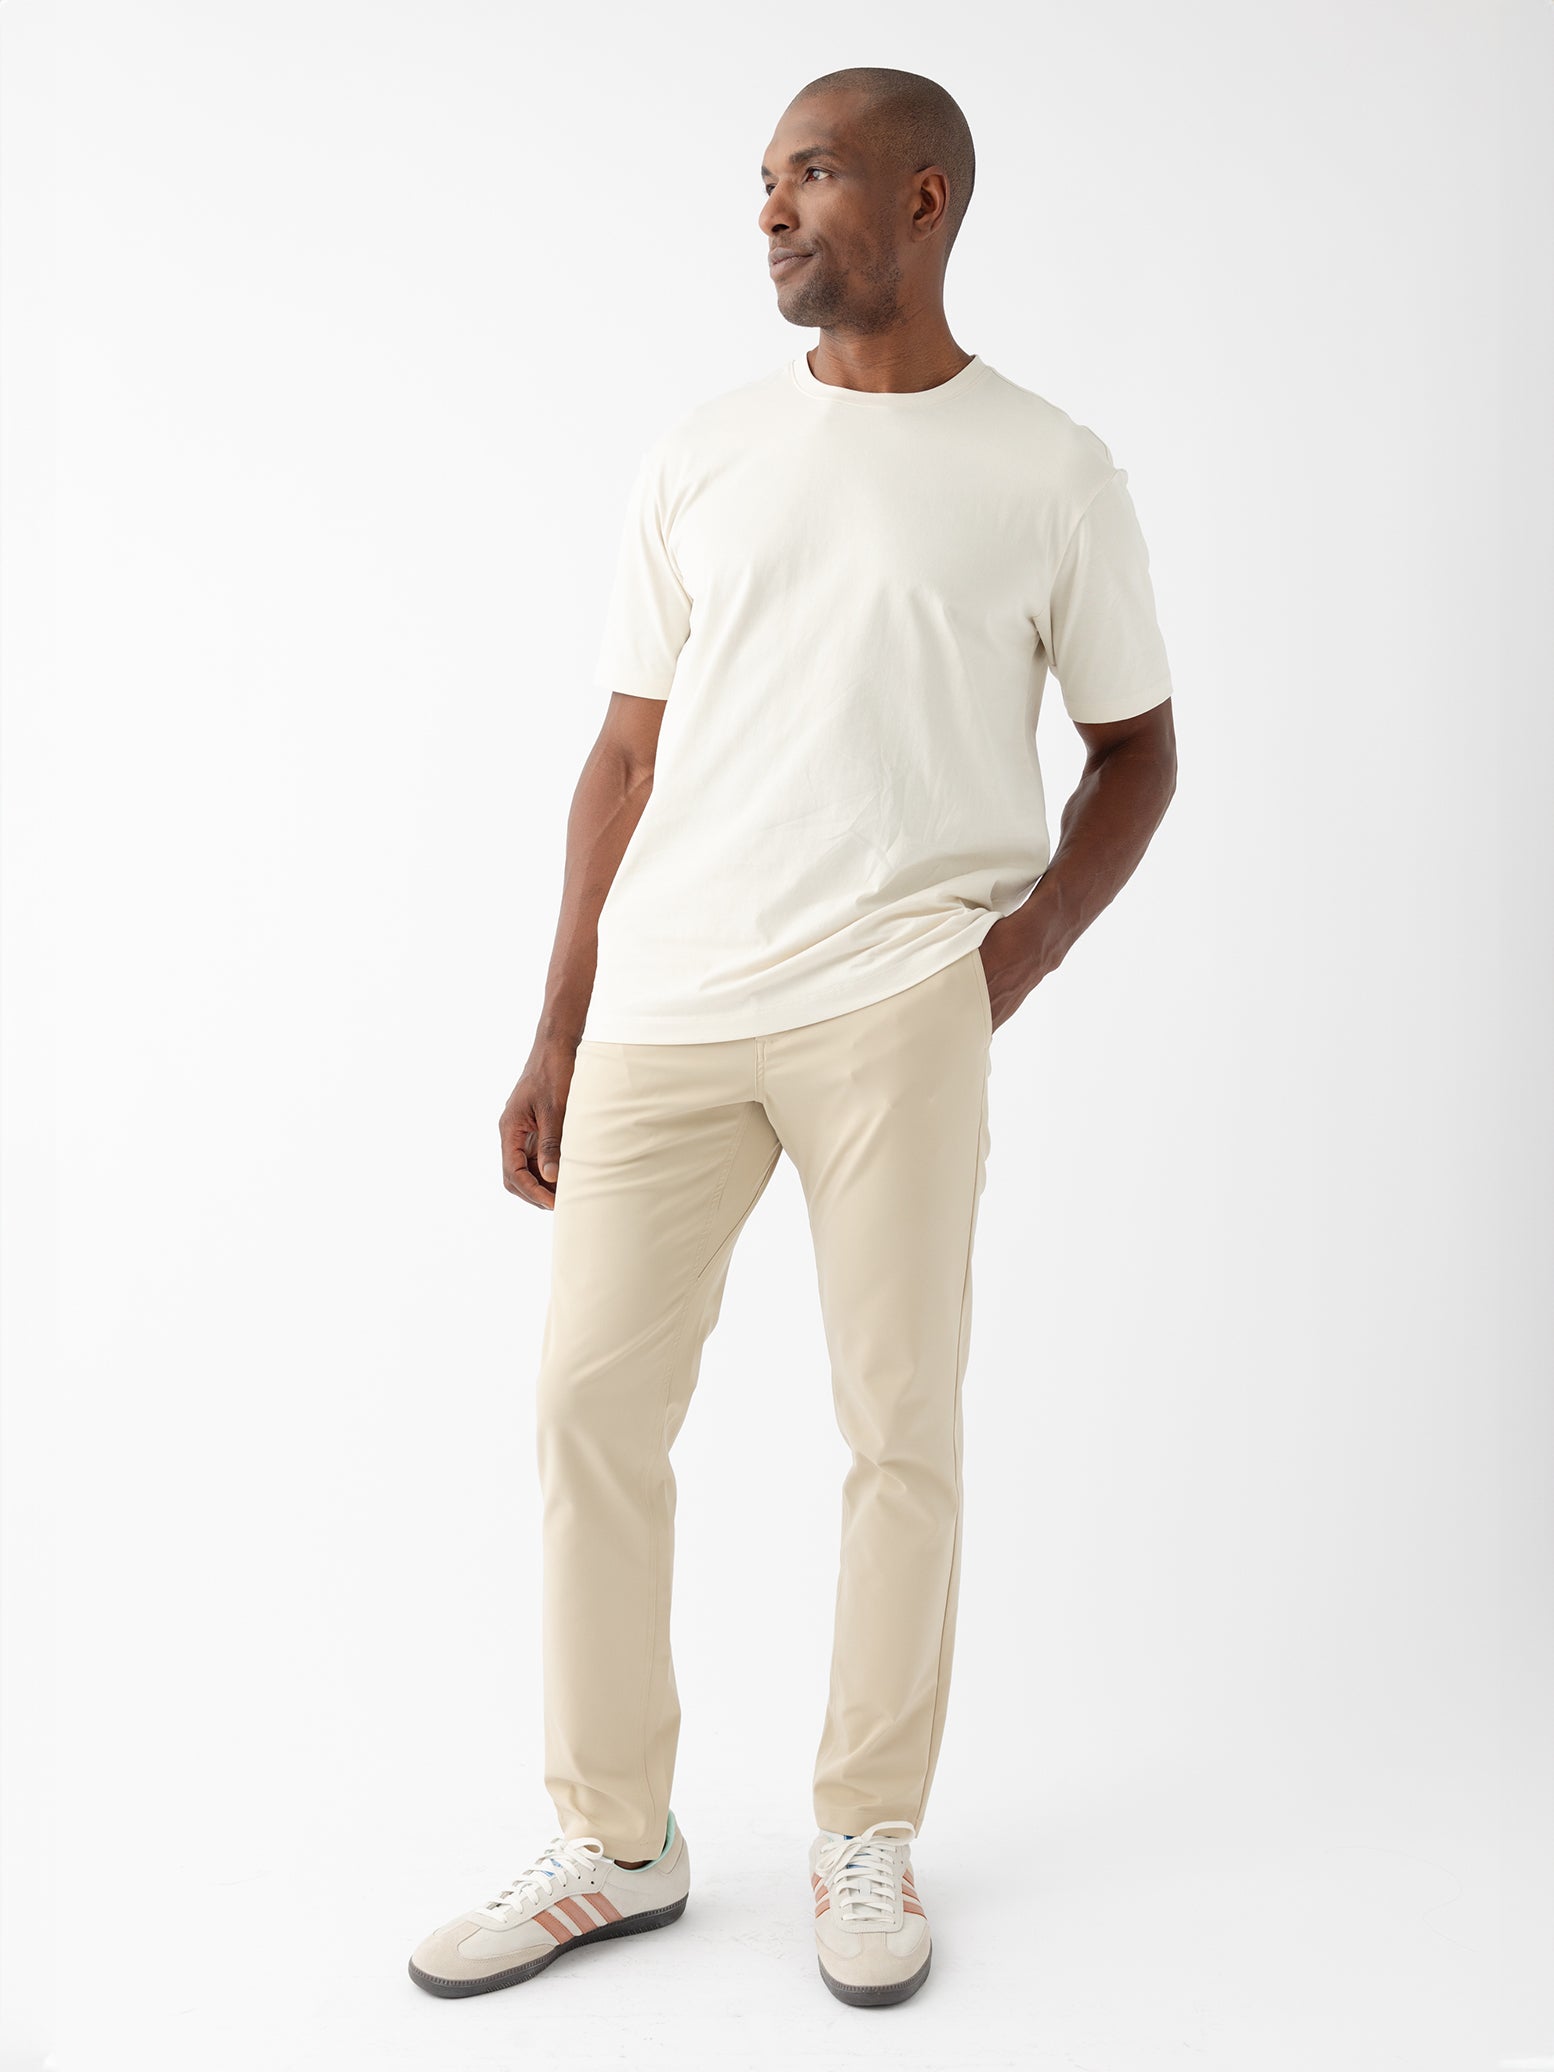 Man wearing alabaster tee and khaki pants with white background |Color:Alabaster